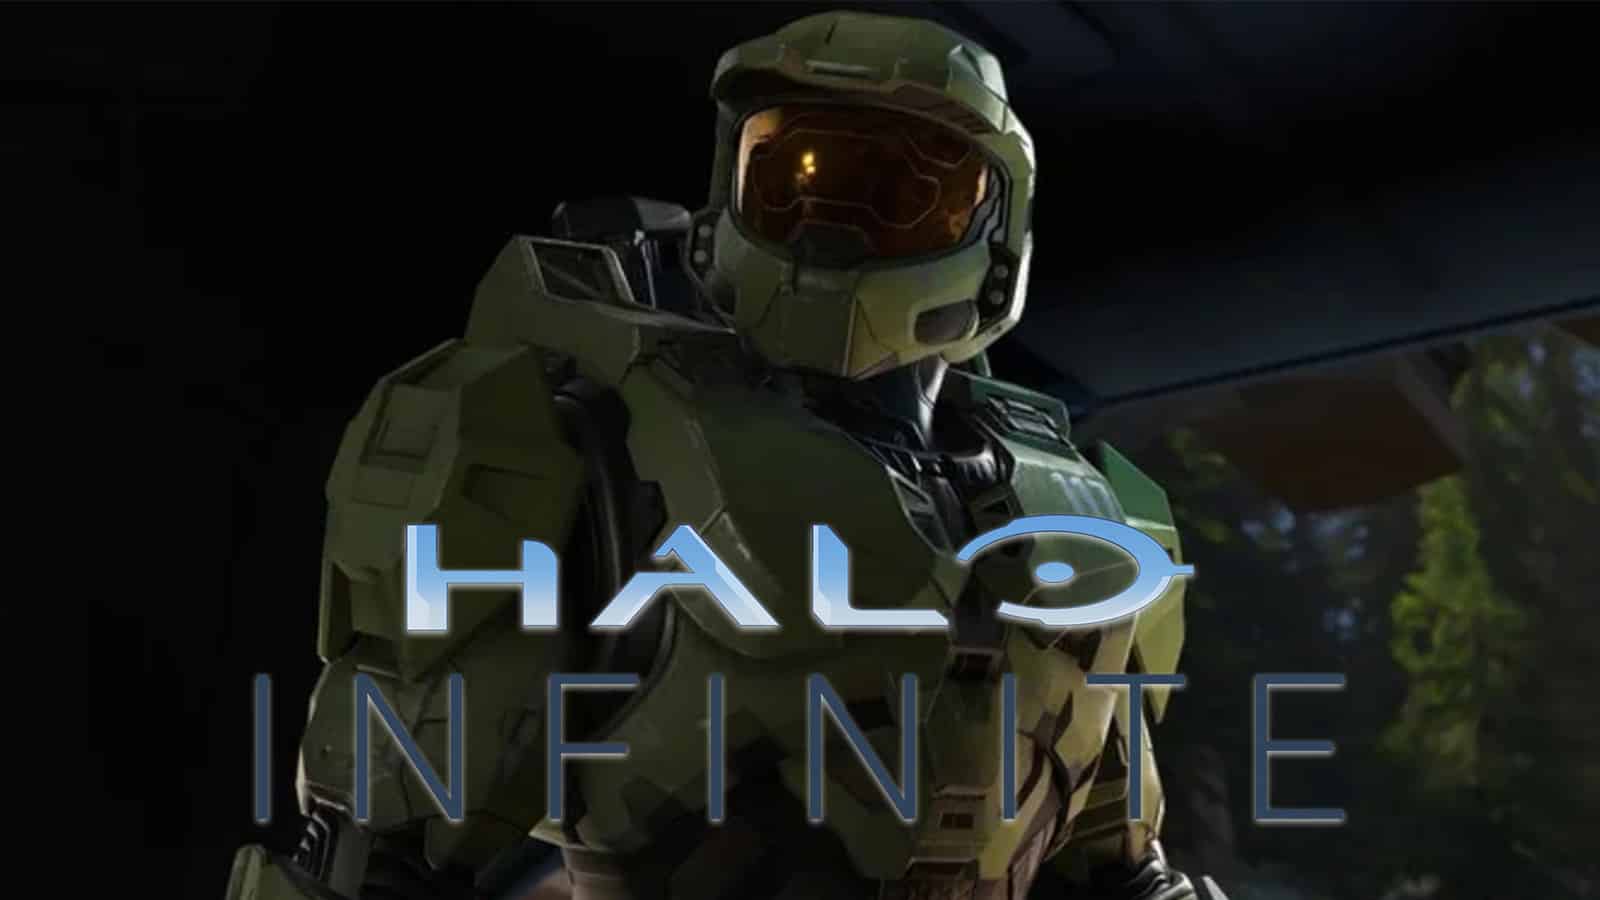 Official artwork from Halo Infinite